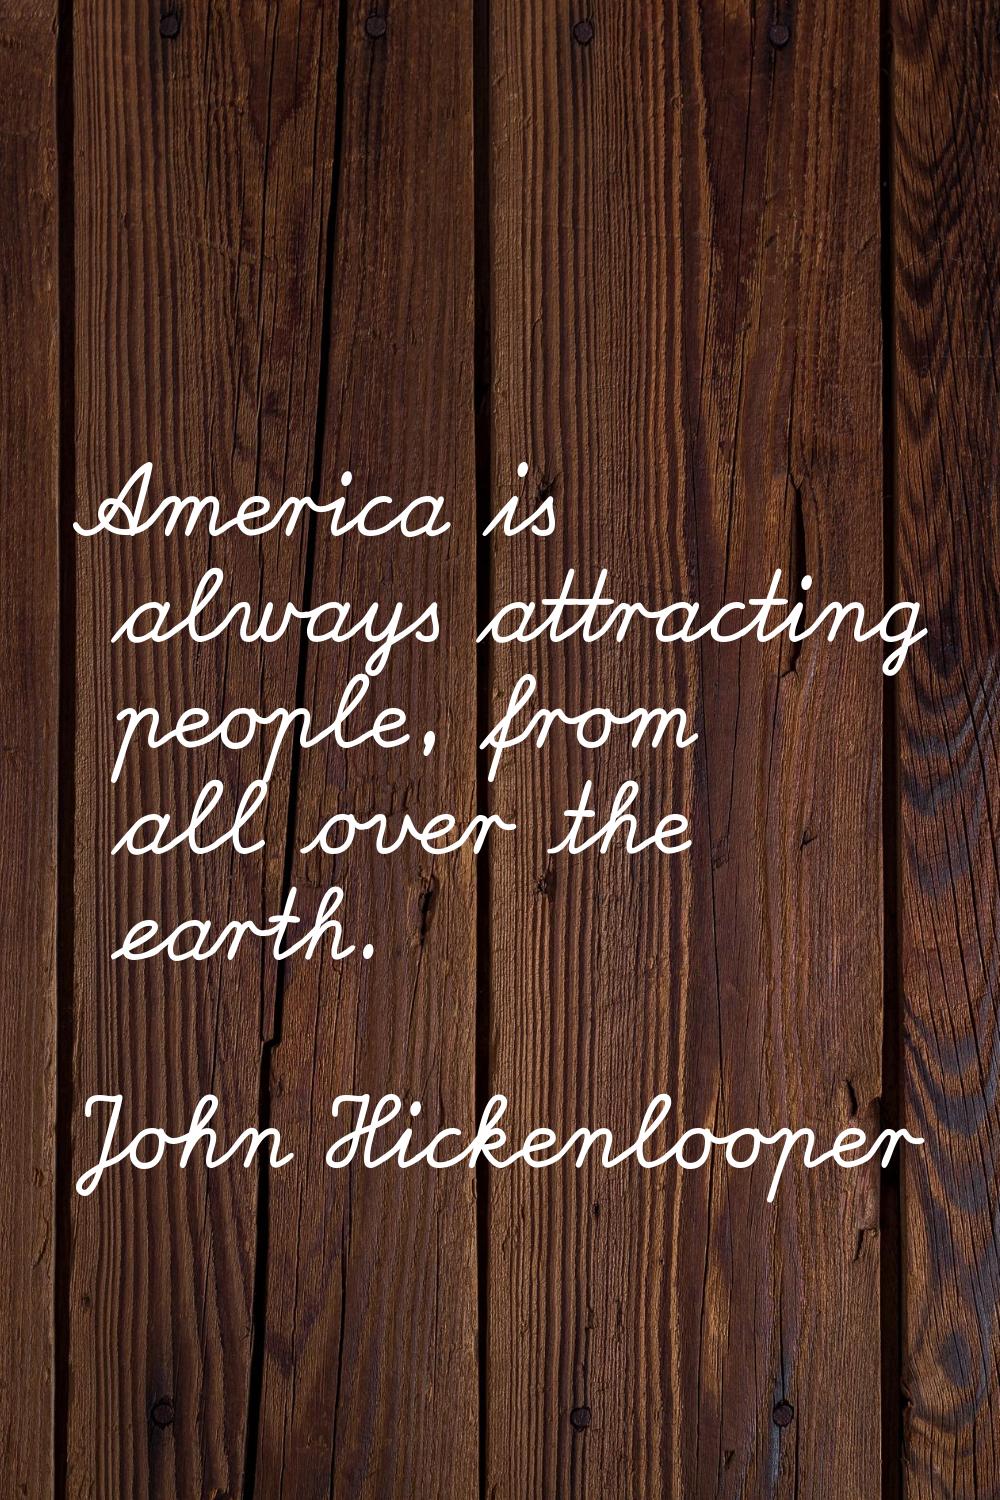 America is always attracting people, from all over the earth.